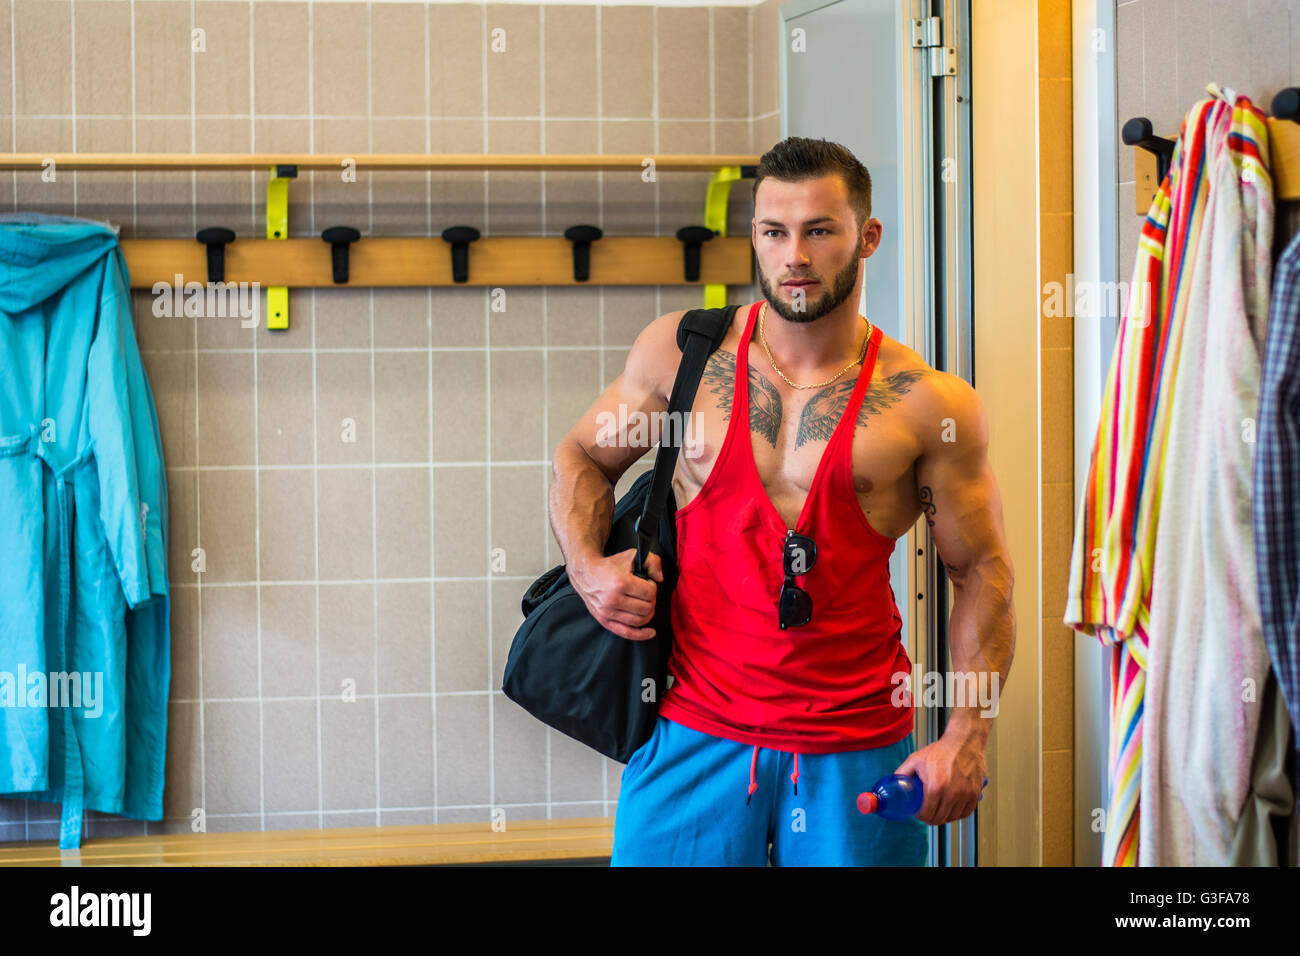 Portrait of handsome man in dressing room with sportsbag Stock Photo